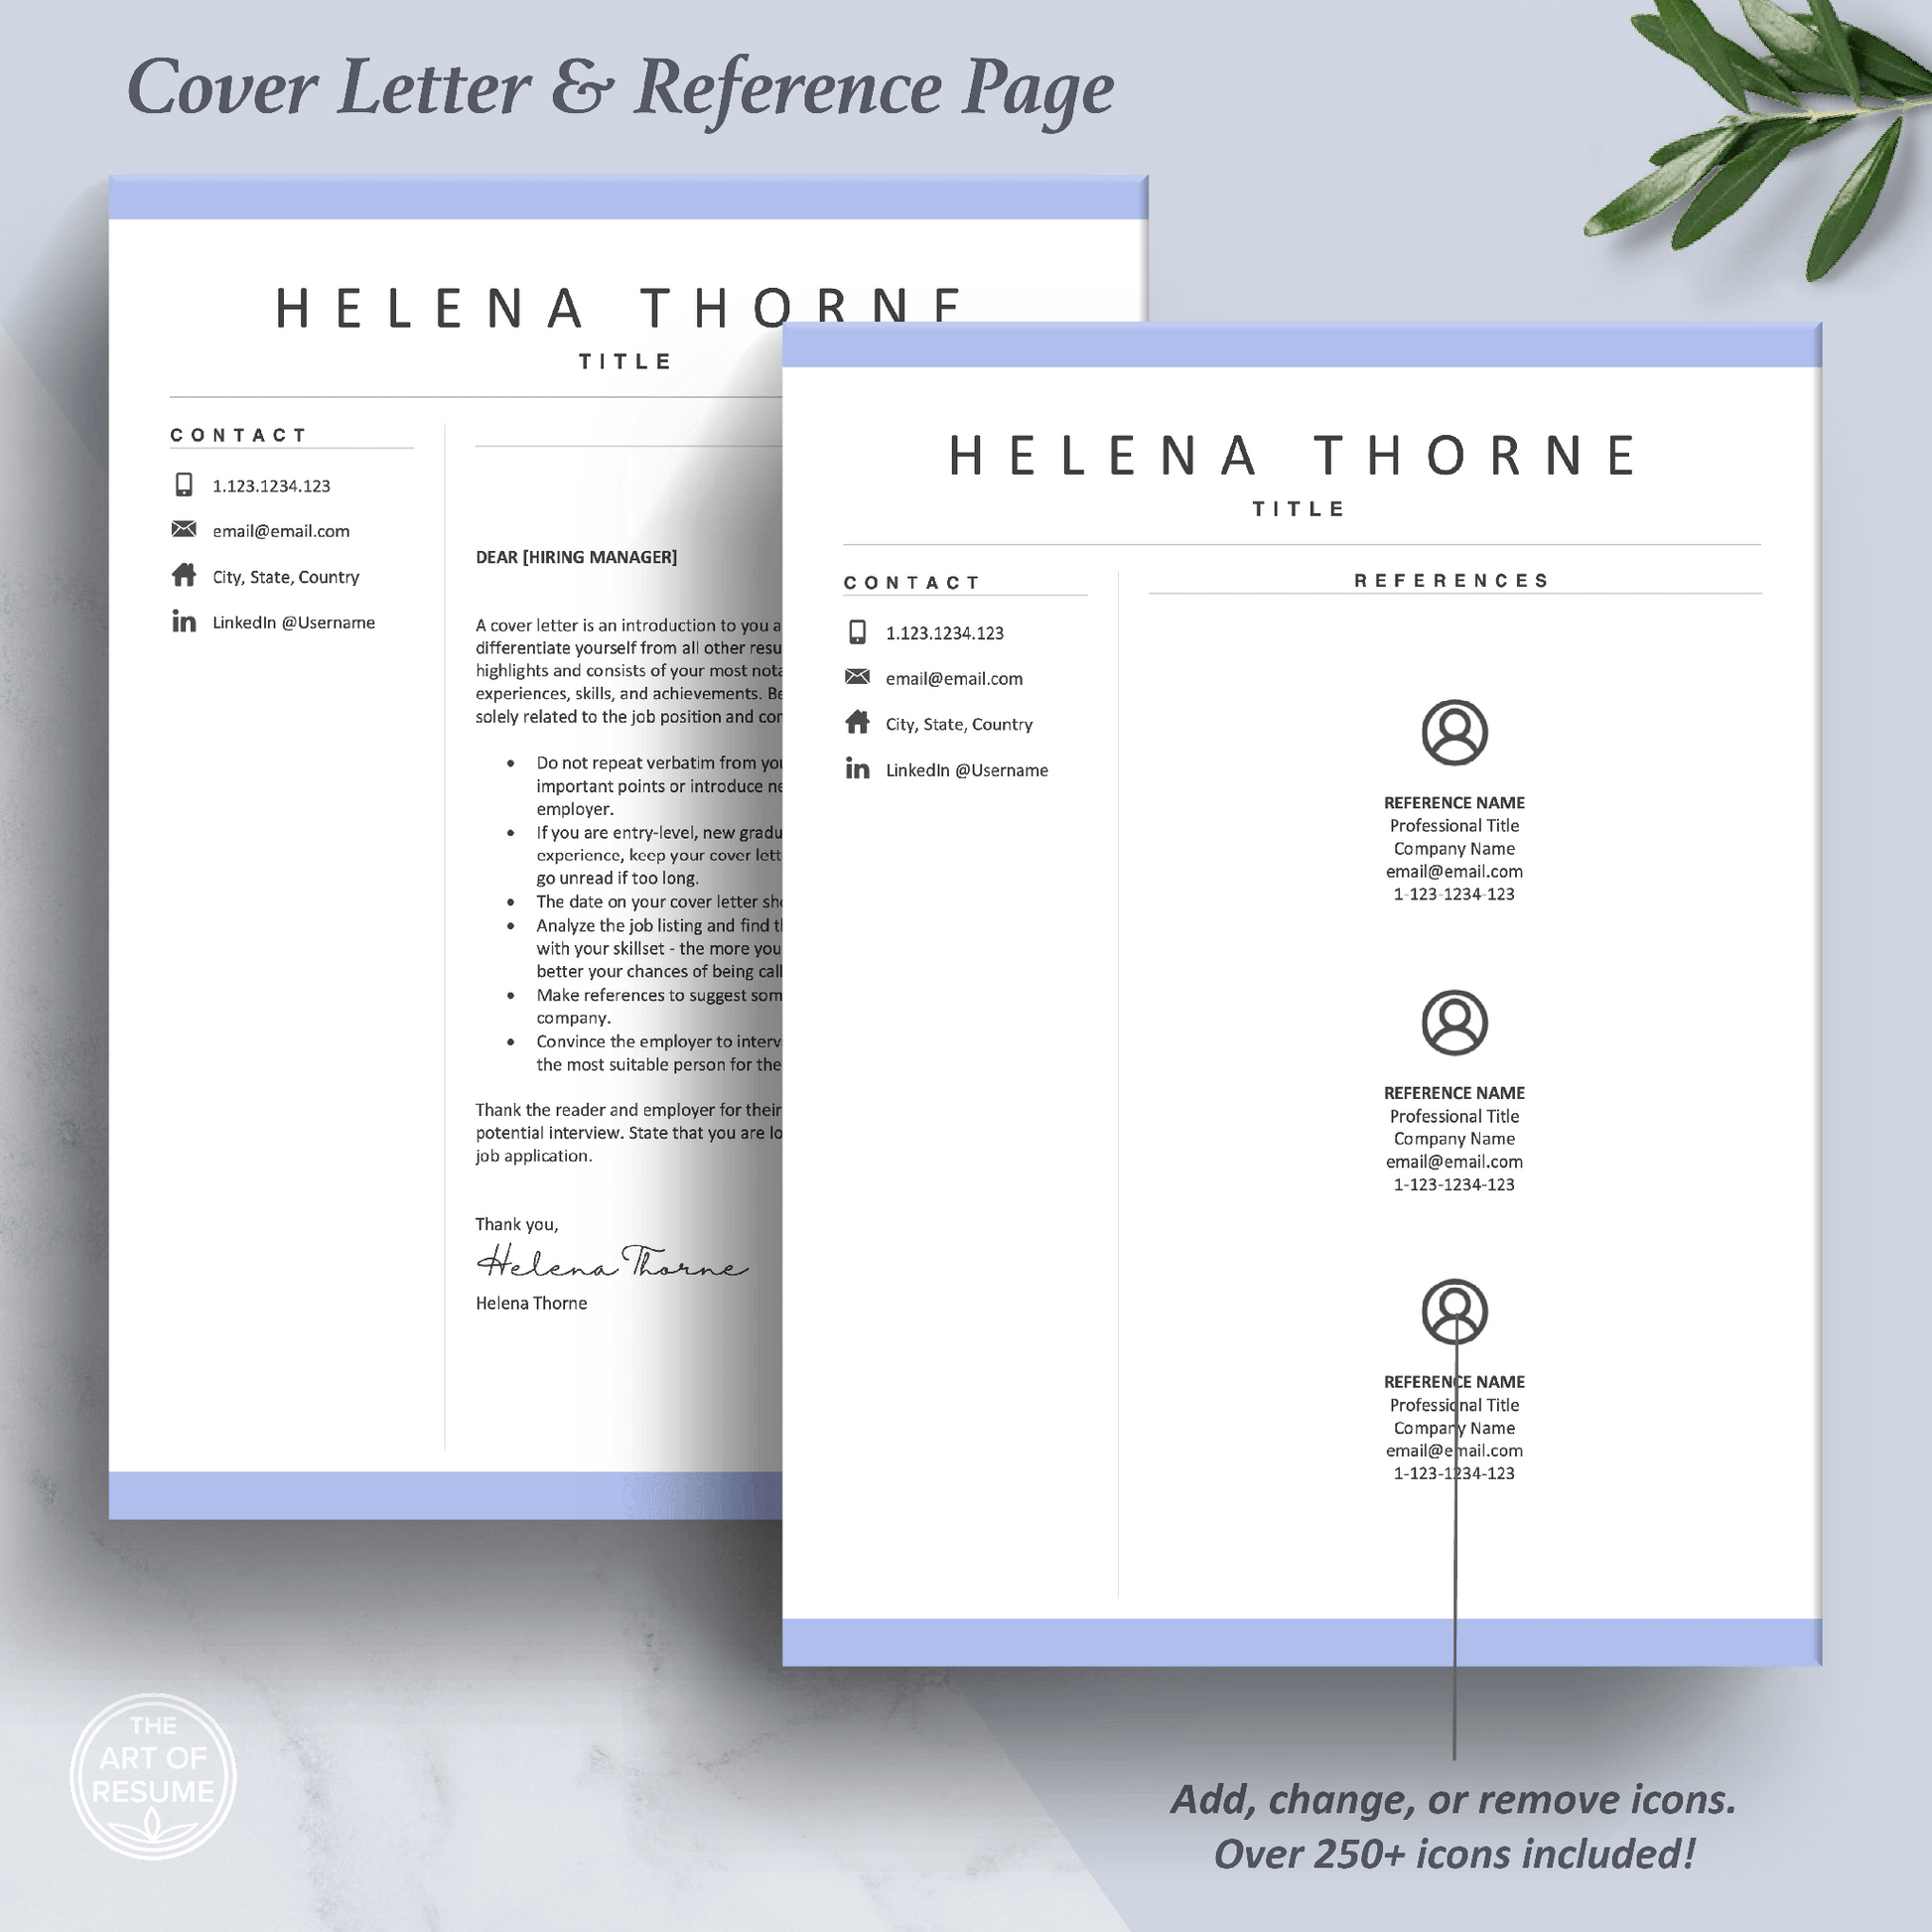 The Art of Resume Templates | Professional Cover Letter and Reference Page Design Templates Instant Download